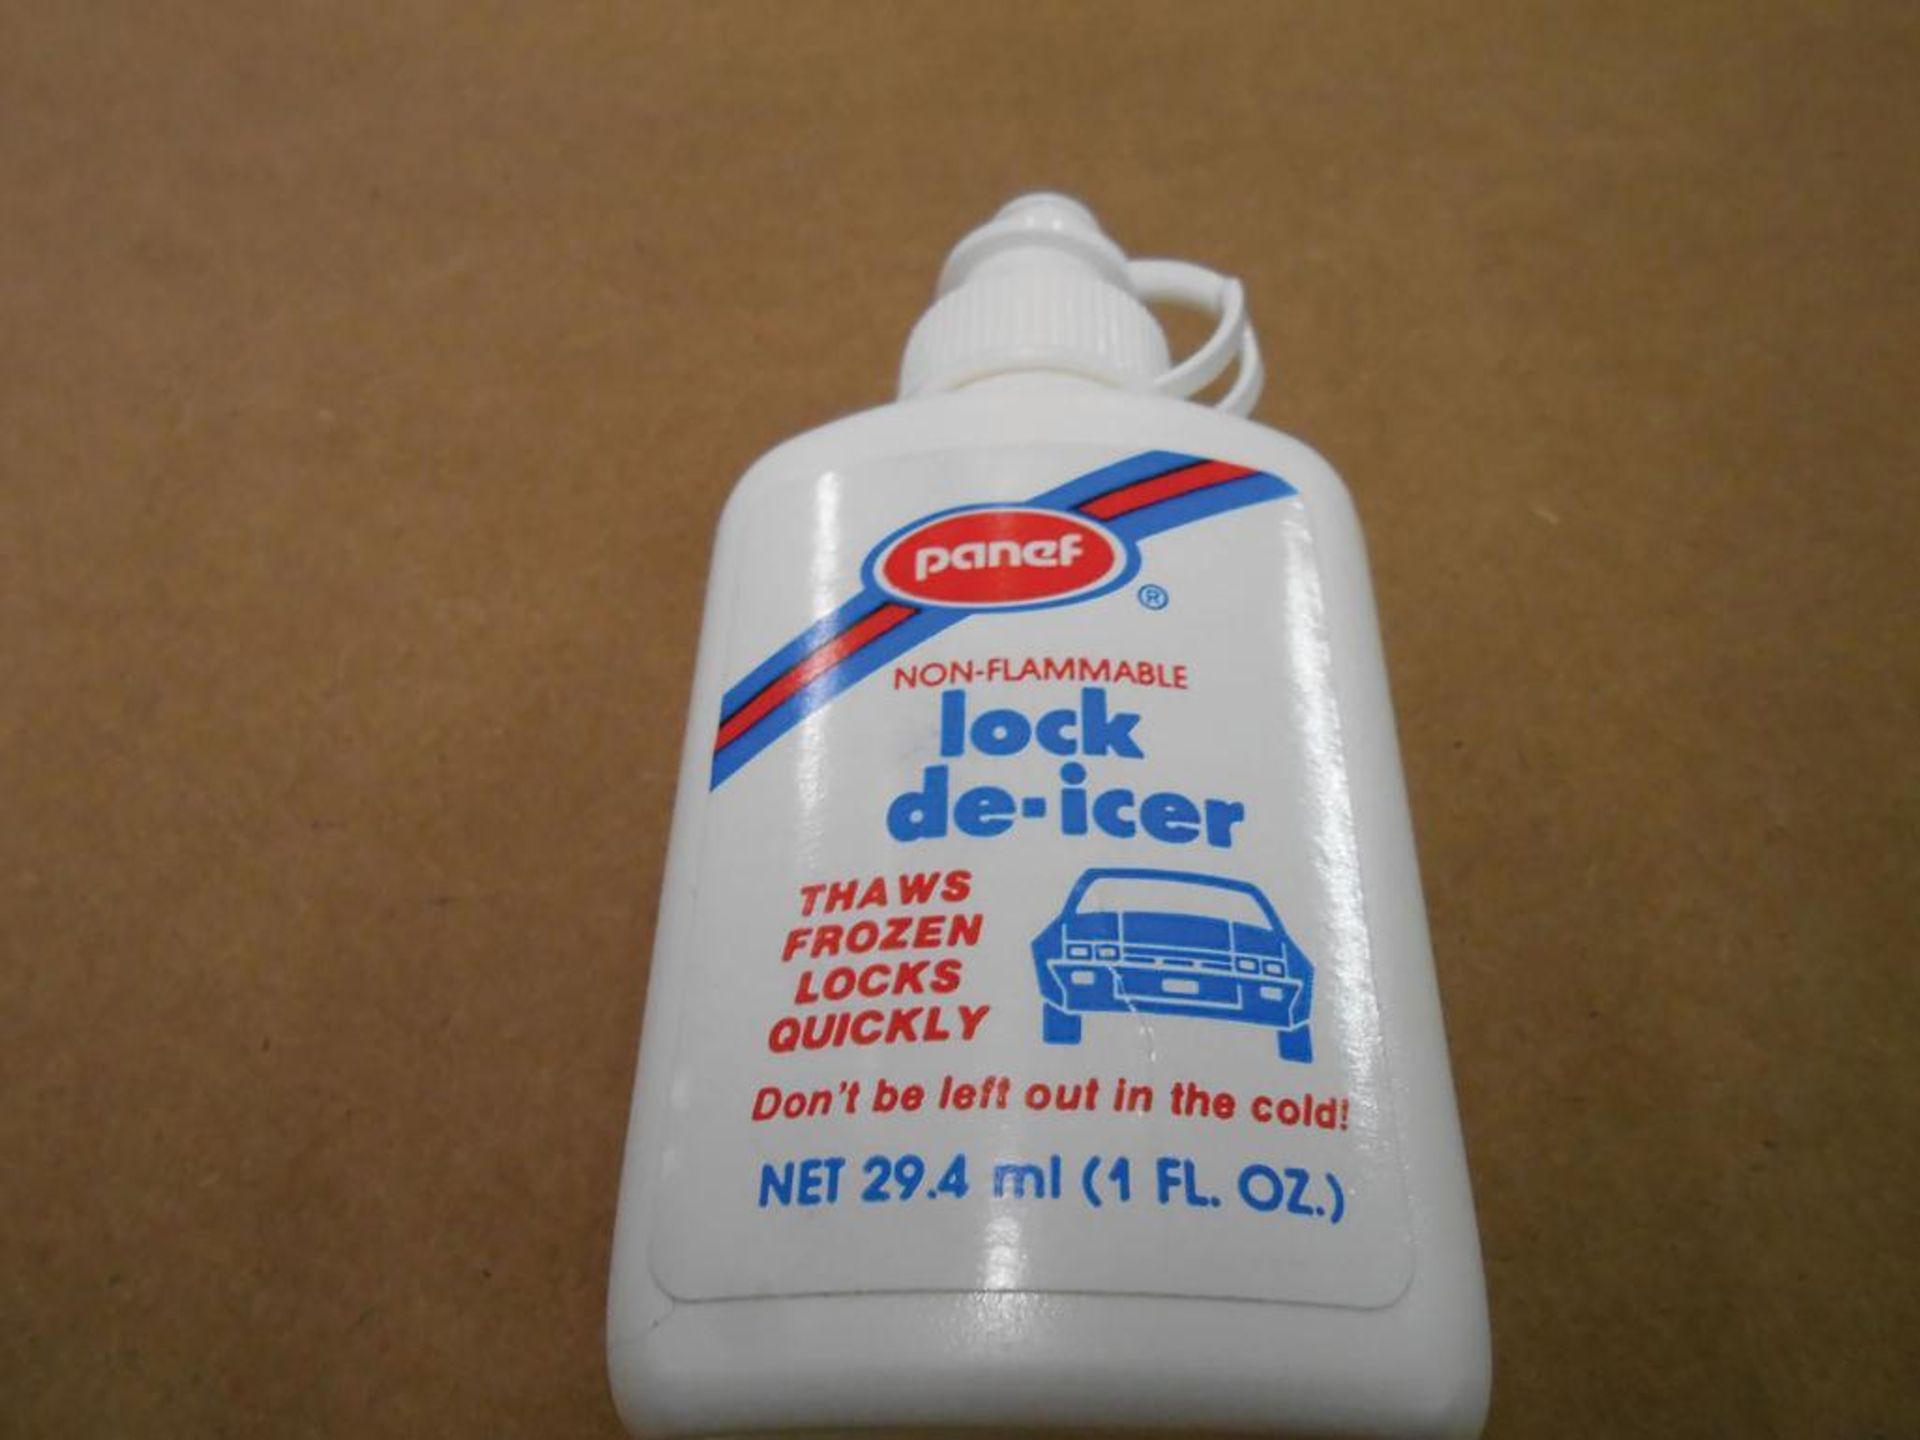 (864) Units of Panef 1oz Lock De-Icer Thaws Frozen Lock Quickly, Model LD-24, Weight: 1.6 Oz, Dims: